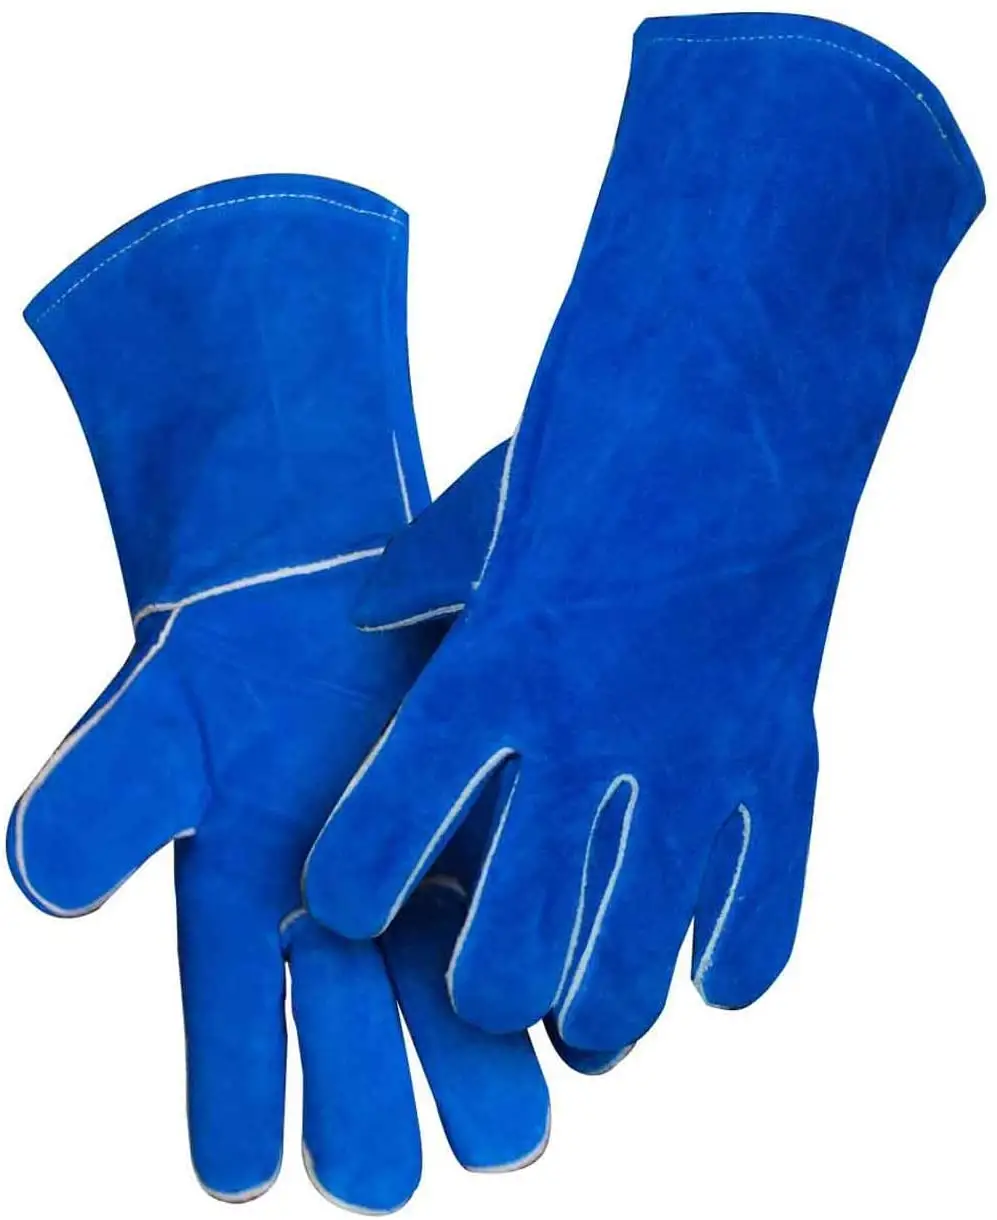 Best Quality Cow split leather palm work safety welding gloves long 14 inches welder gloves heat resistant gloves